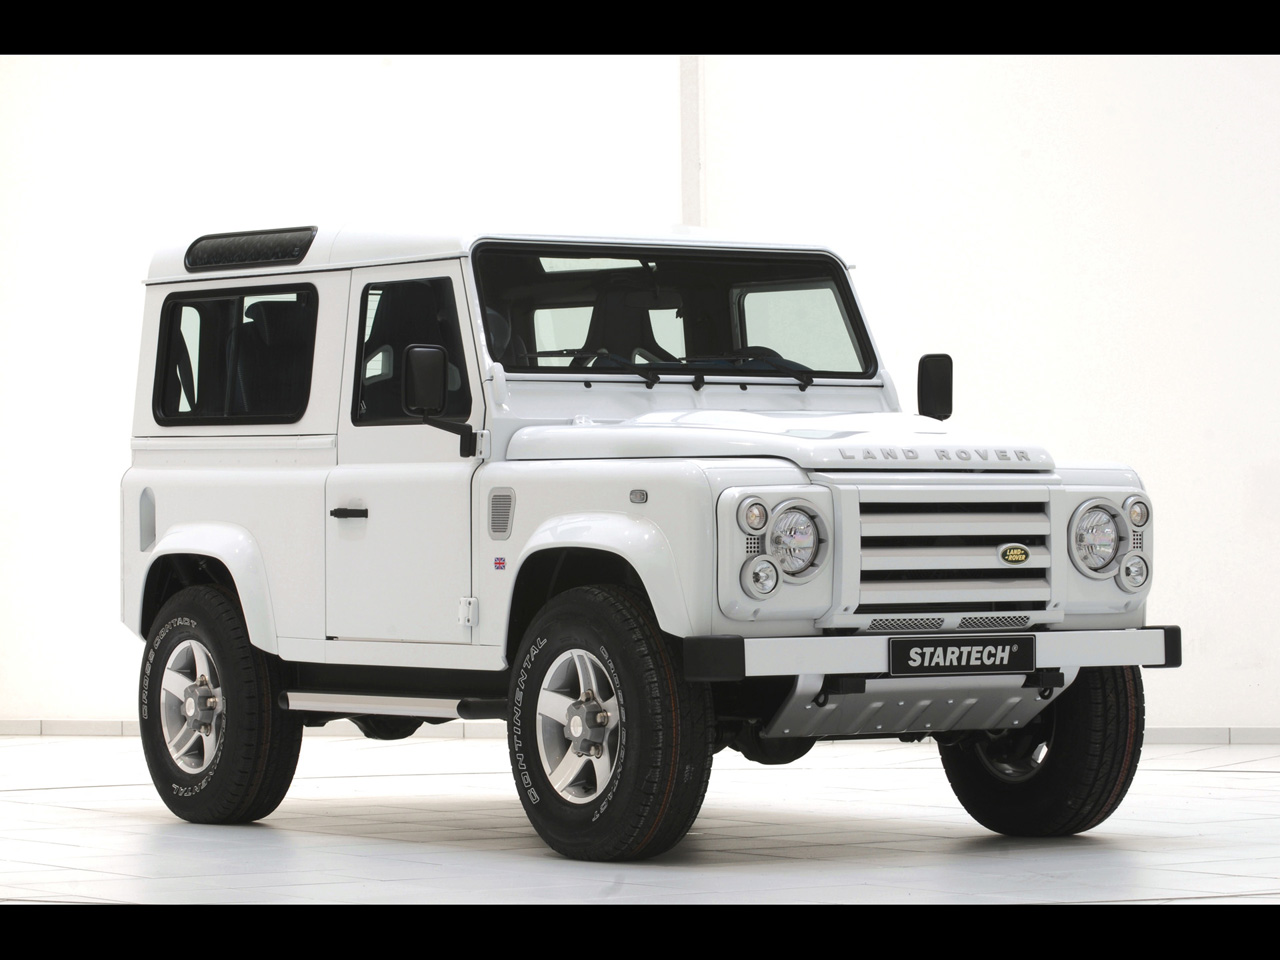 2011 Startech Land Rover Defender Yachting Edition